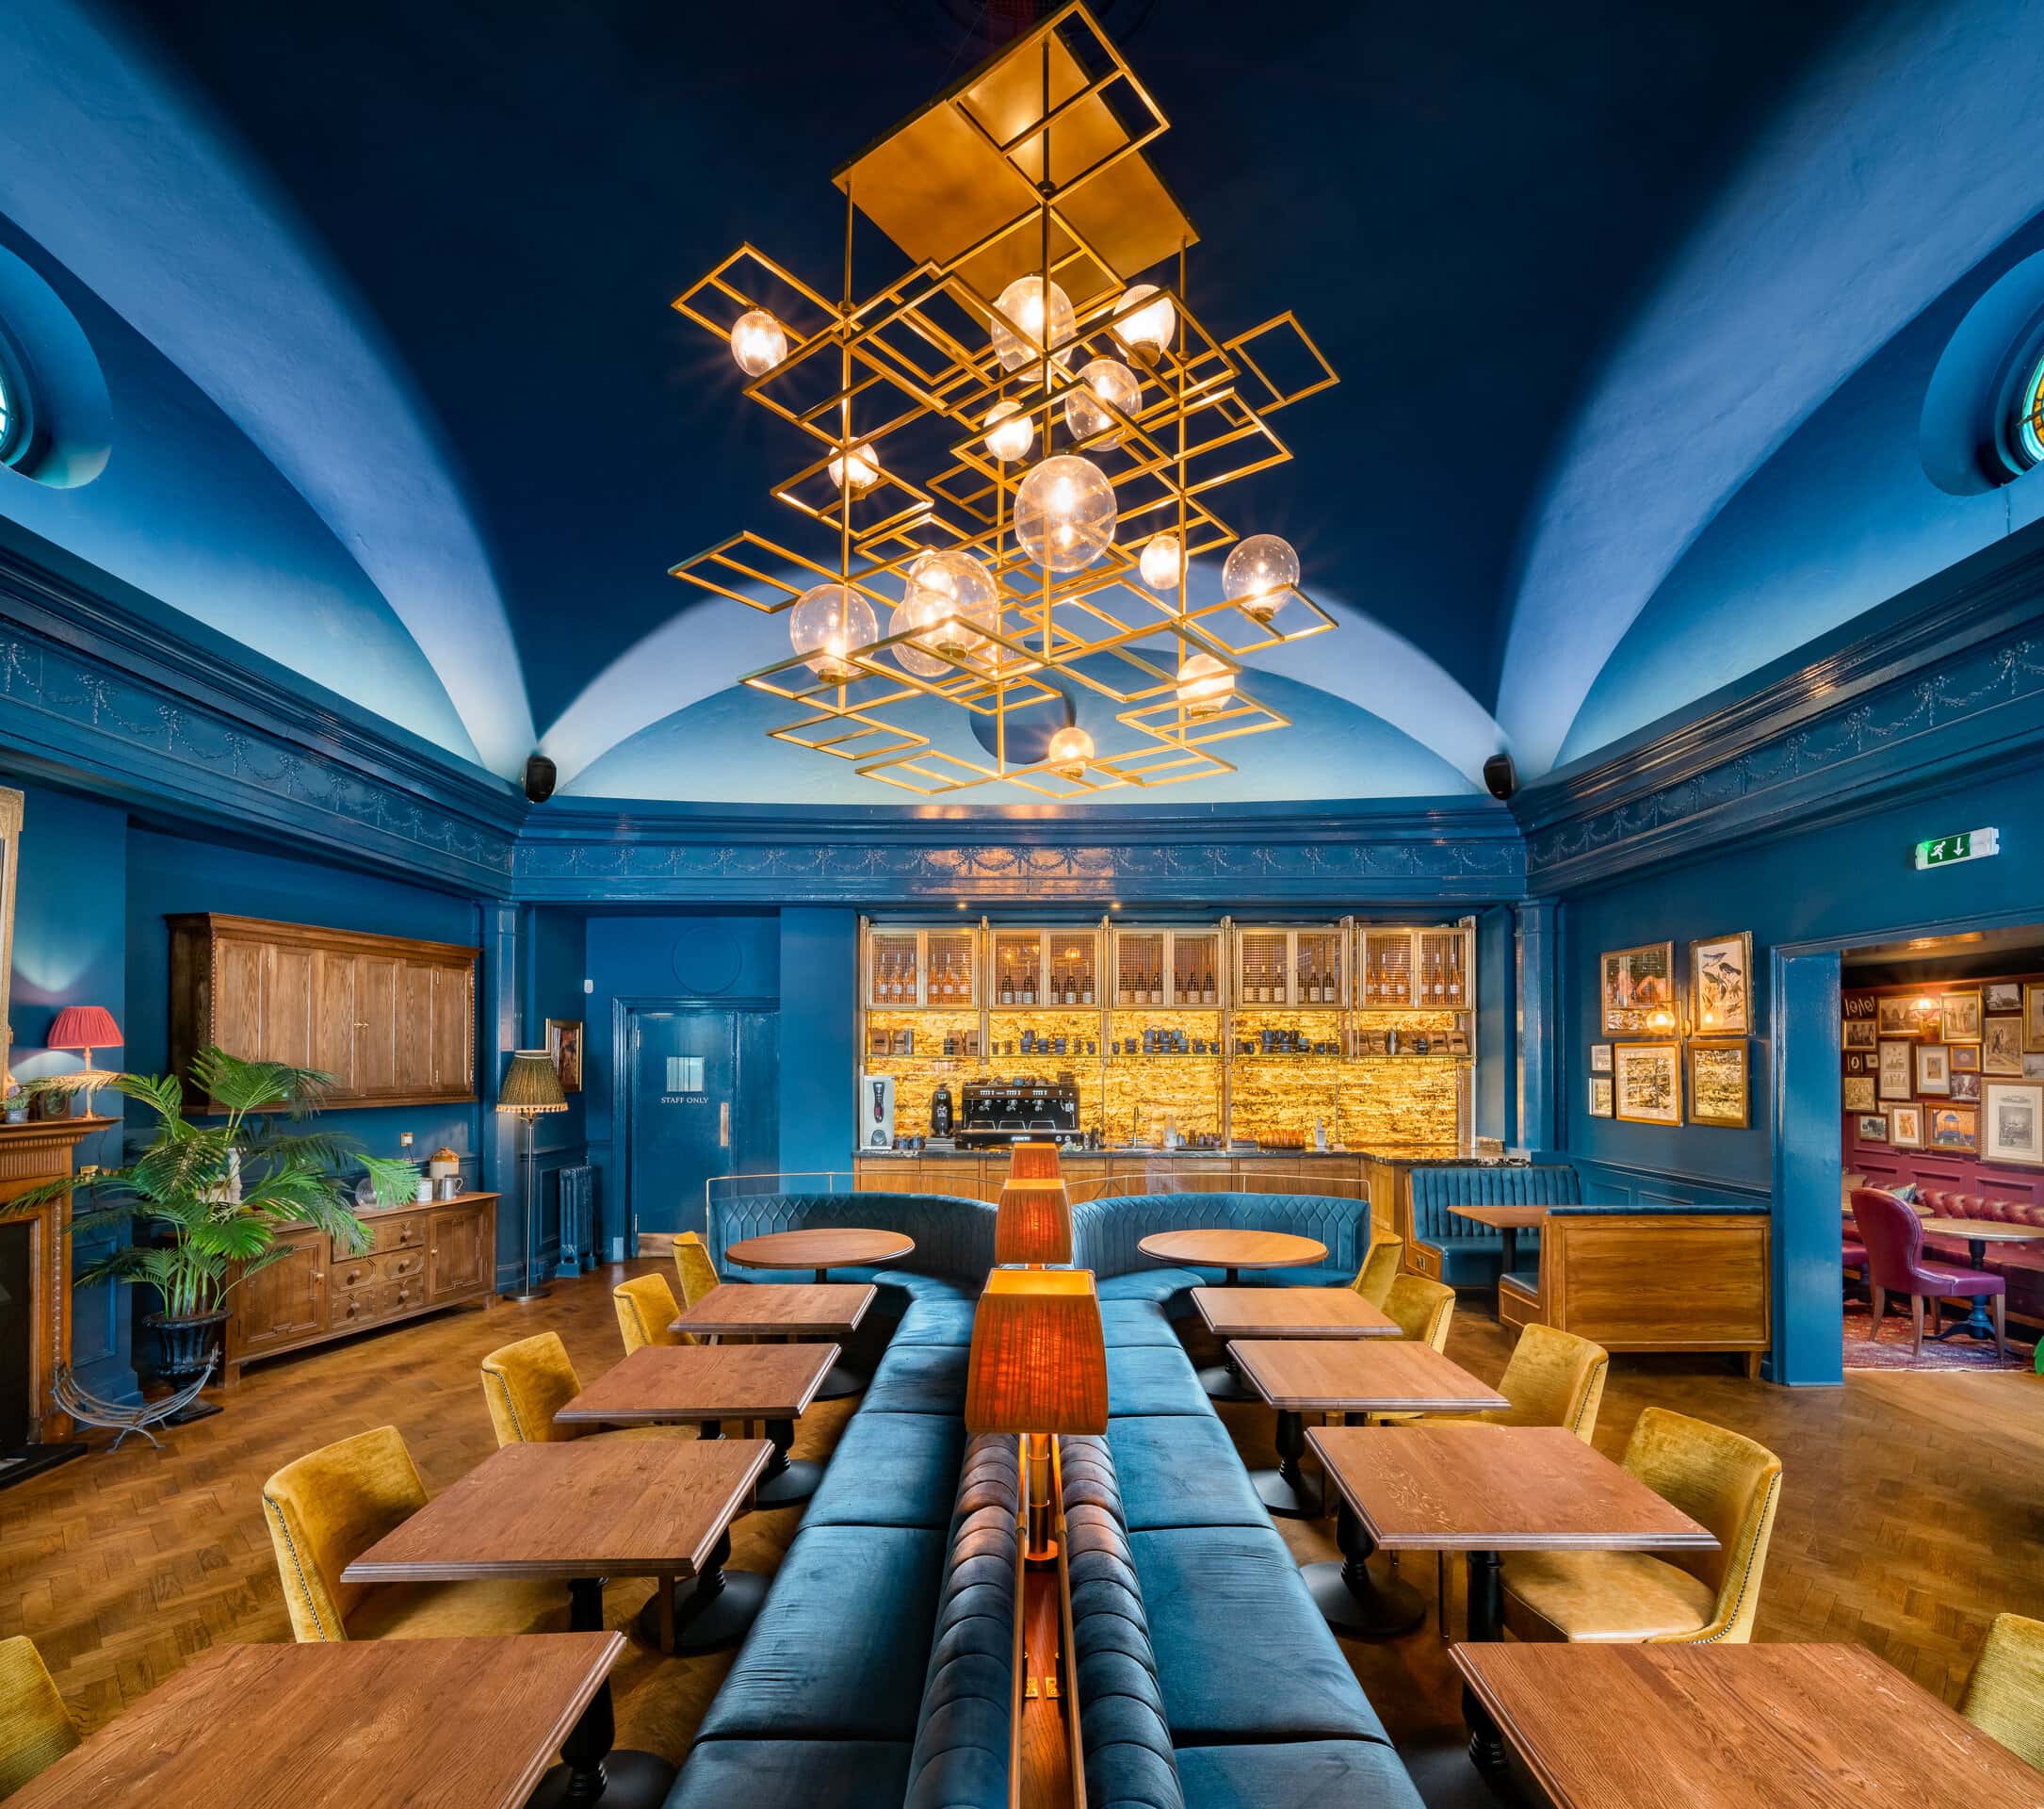 Restaurant space in South West London pub and hotel